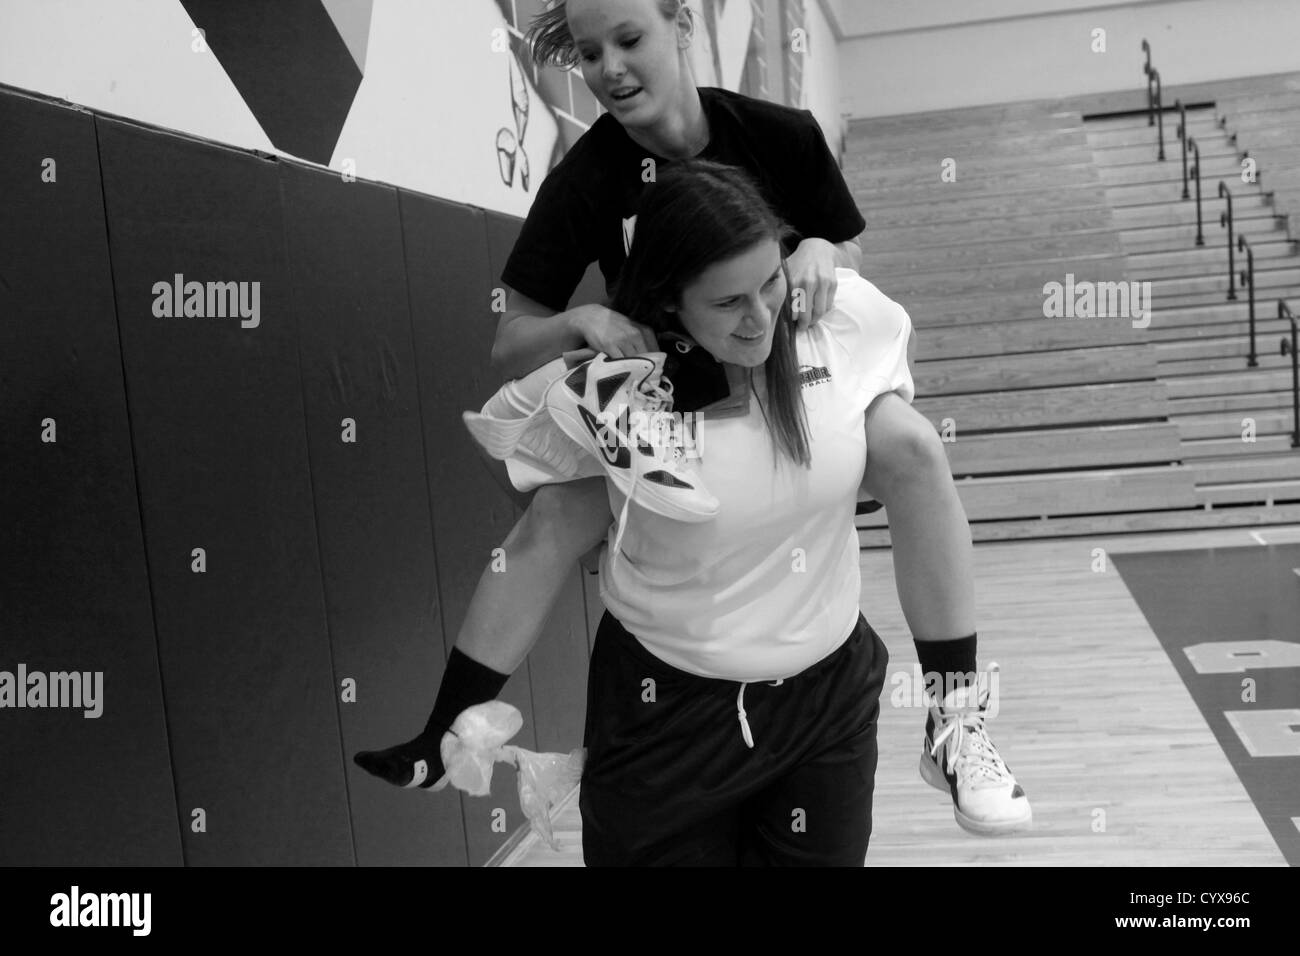 Nov. 02, 2012 - Tampa, Florida, U.S. - Jessica givers her basketball teammate and friend Shannon Perez a piggyback ride during practice after Perez hurt her ankle at Steinbrenner high school on Friday afternoon. Jessica is also very close with her basketball teammates and hopes that the team will make it to state this year. [Eve Edelheit, Times] (Credit Image: © Eve Edelheit/Tampa Bay Times/ZUMAPRESS.com) Stock Photo